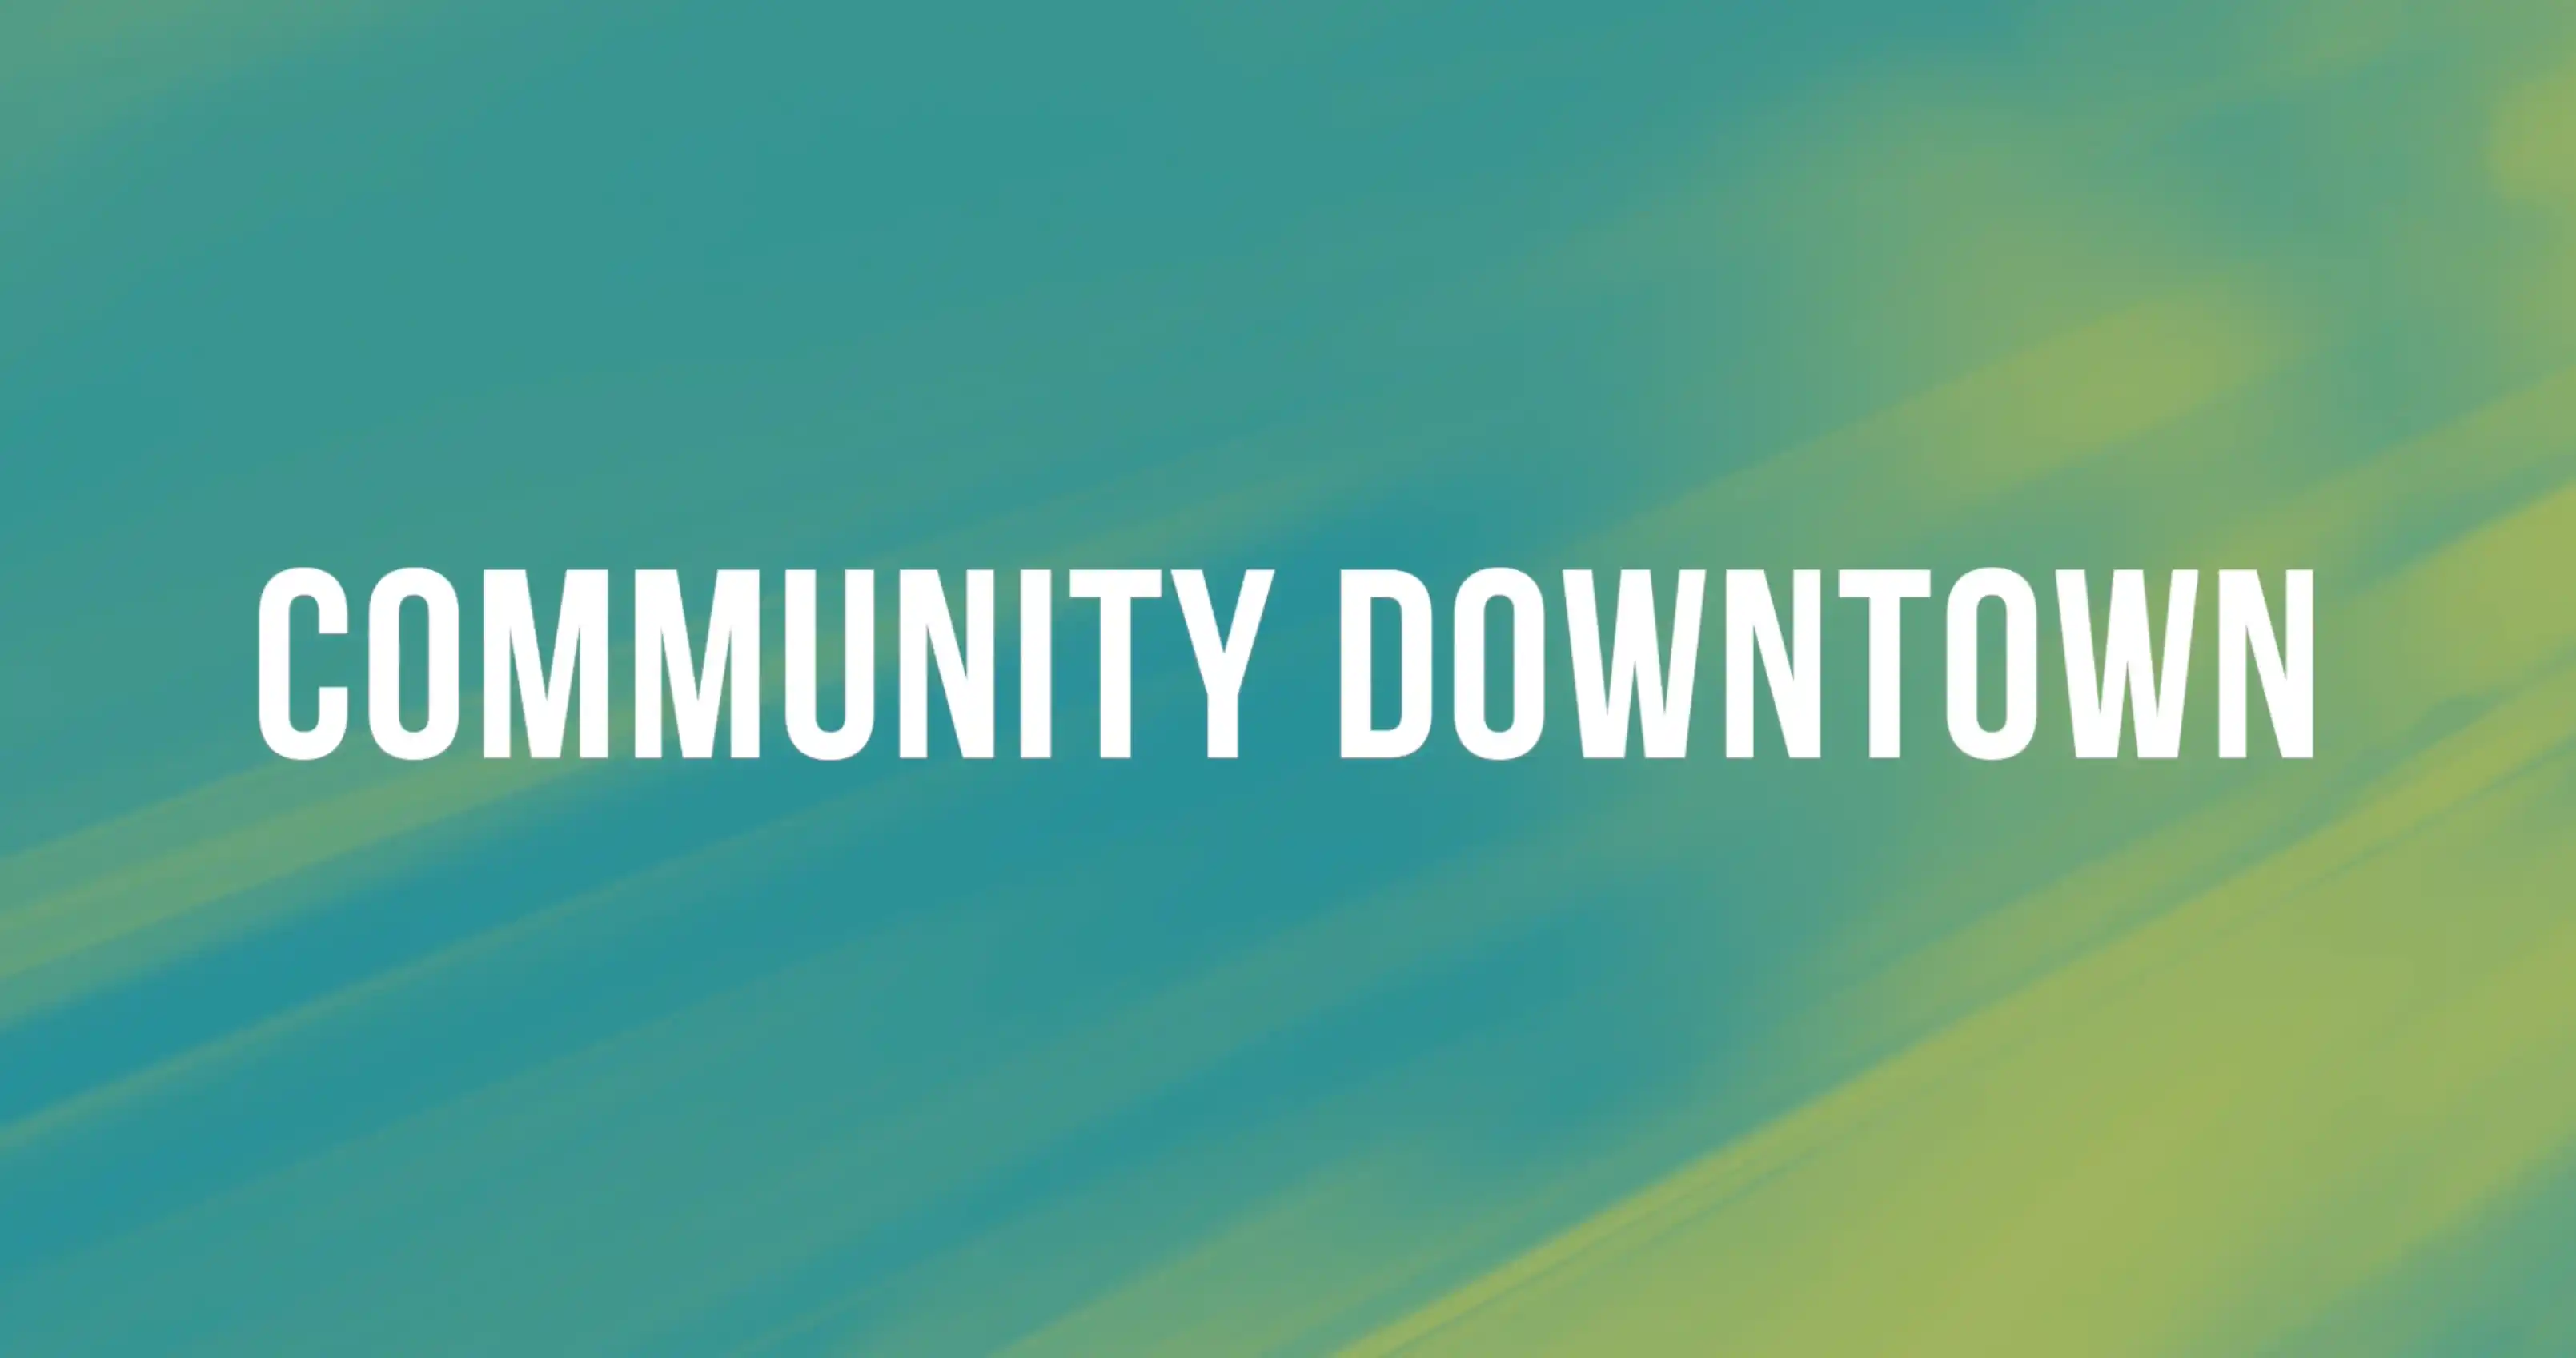 Graphic banner with stylized text reading "COMMUNITY DOWNTOWN" over a blurred turquoise and lime green background.